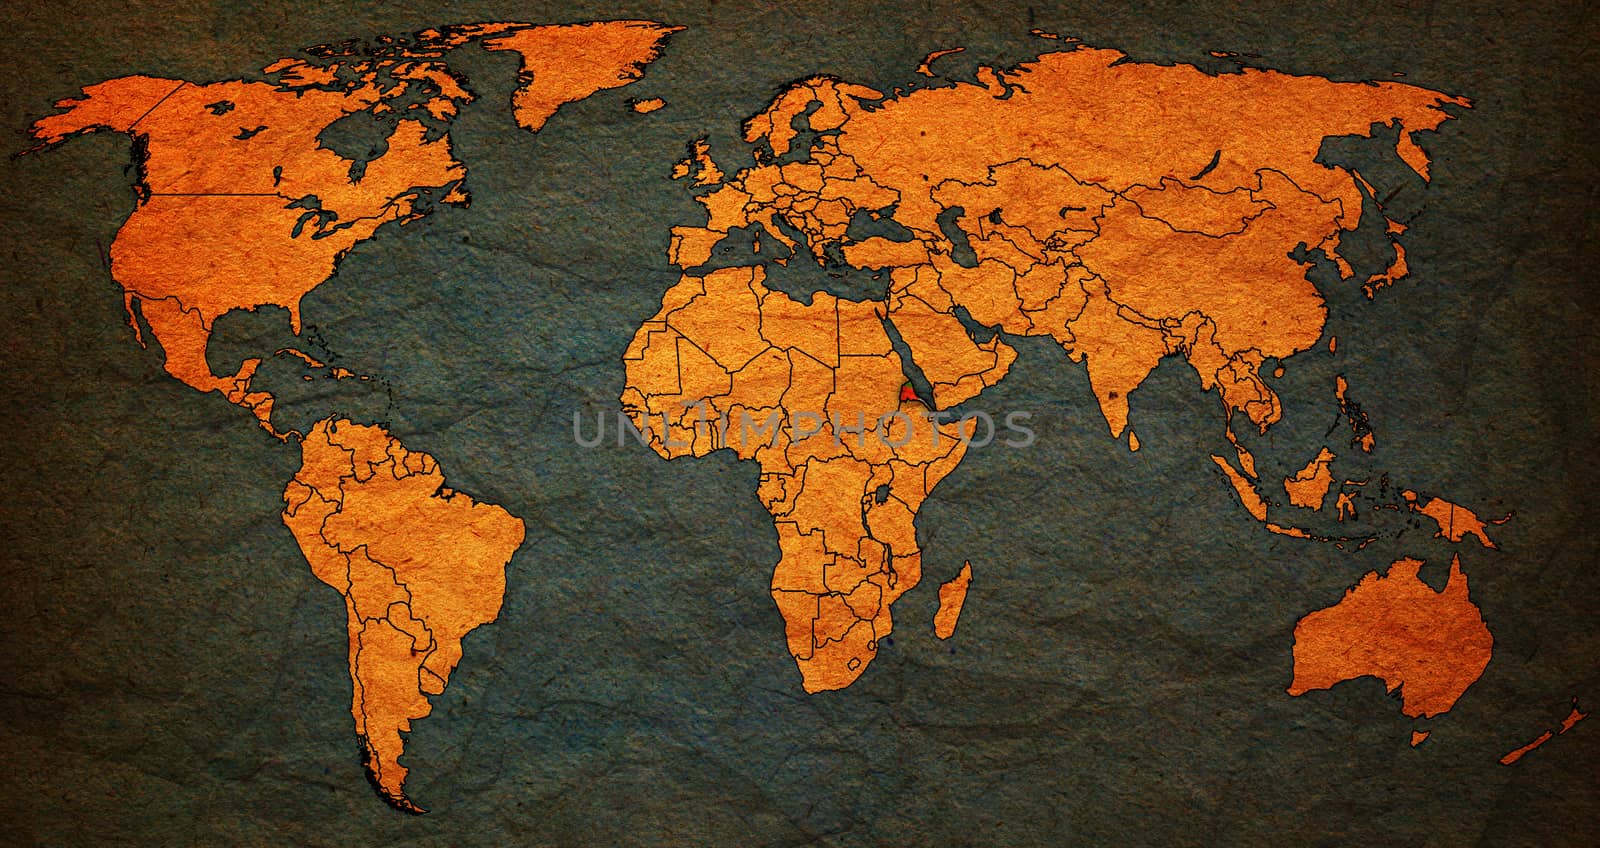 eritrea territory on actual world map by michal812